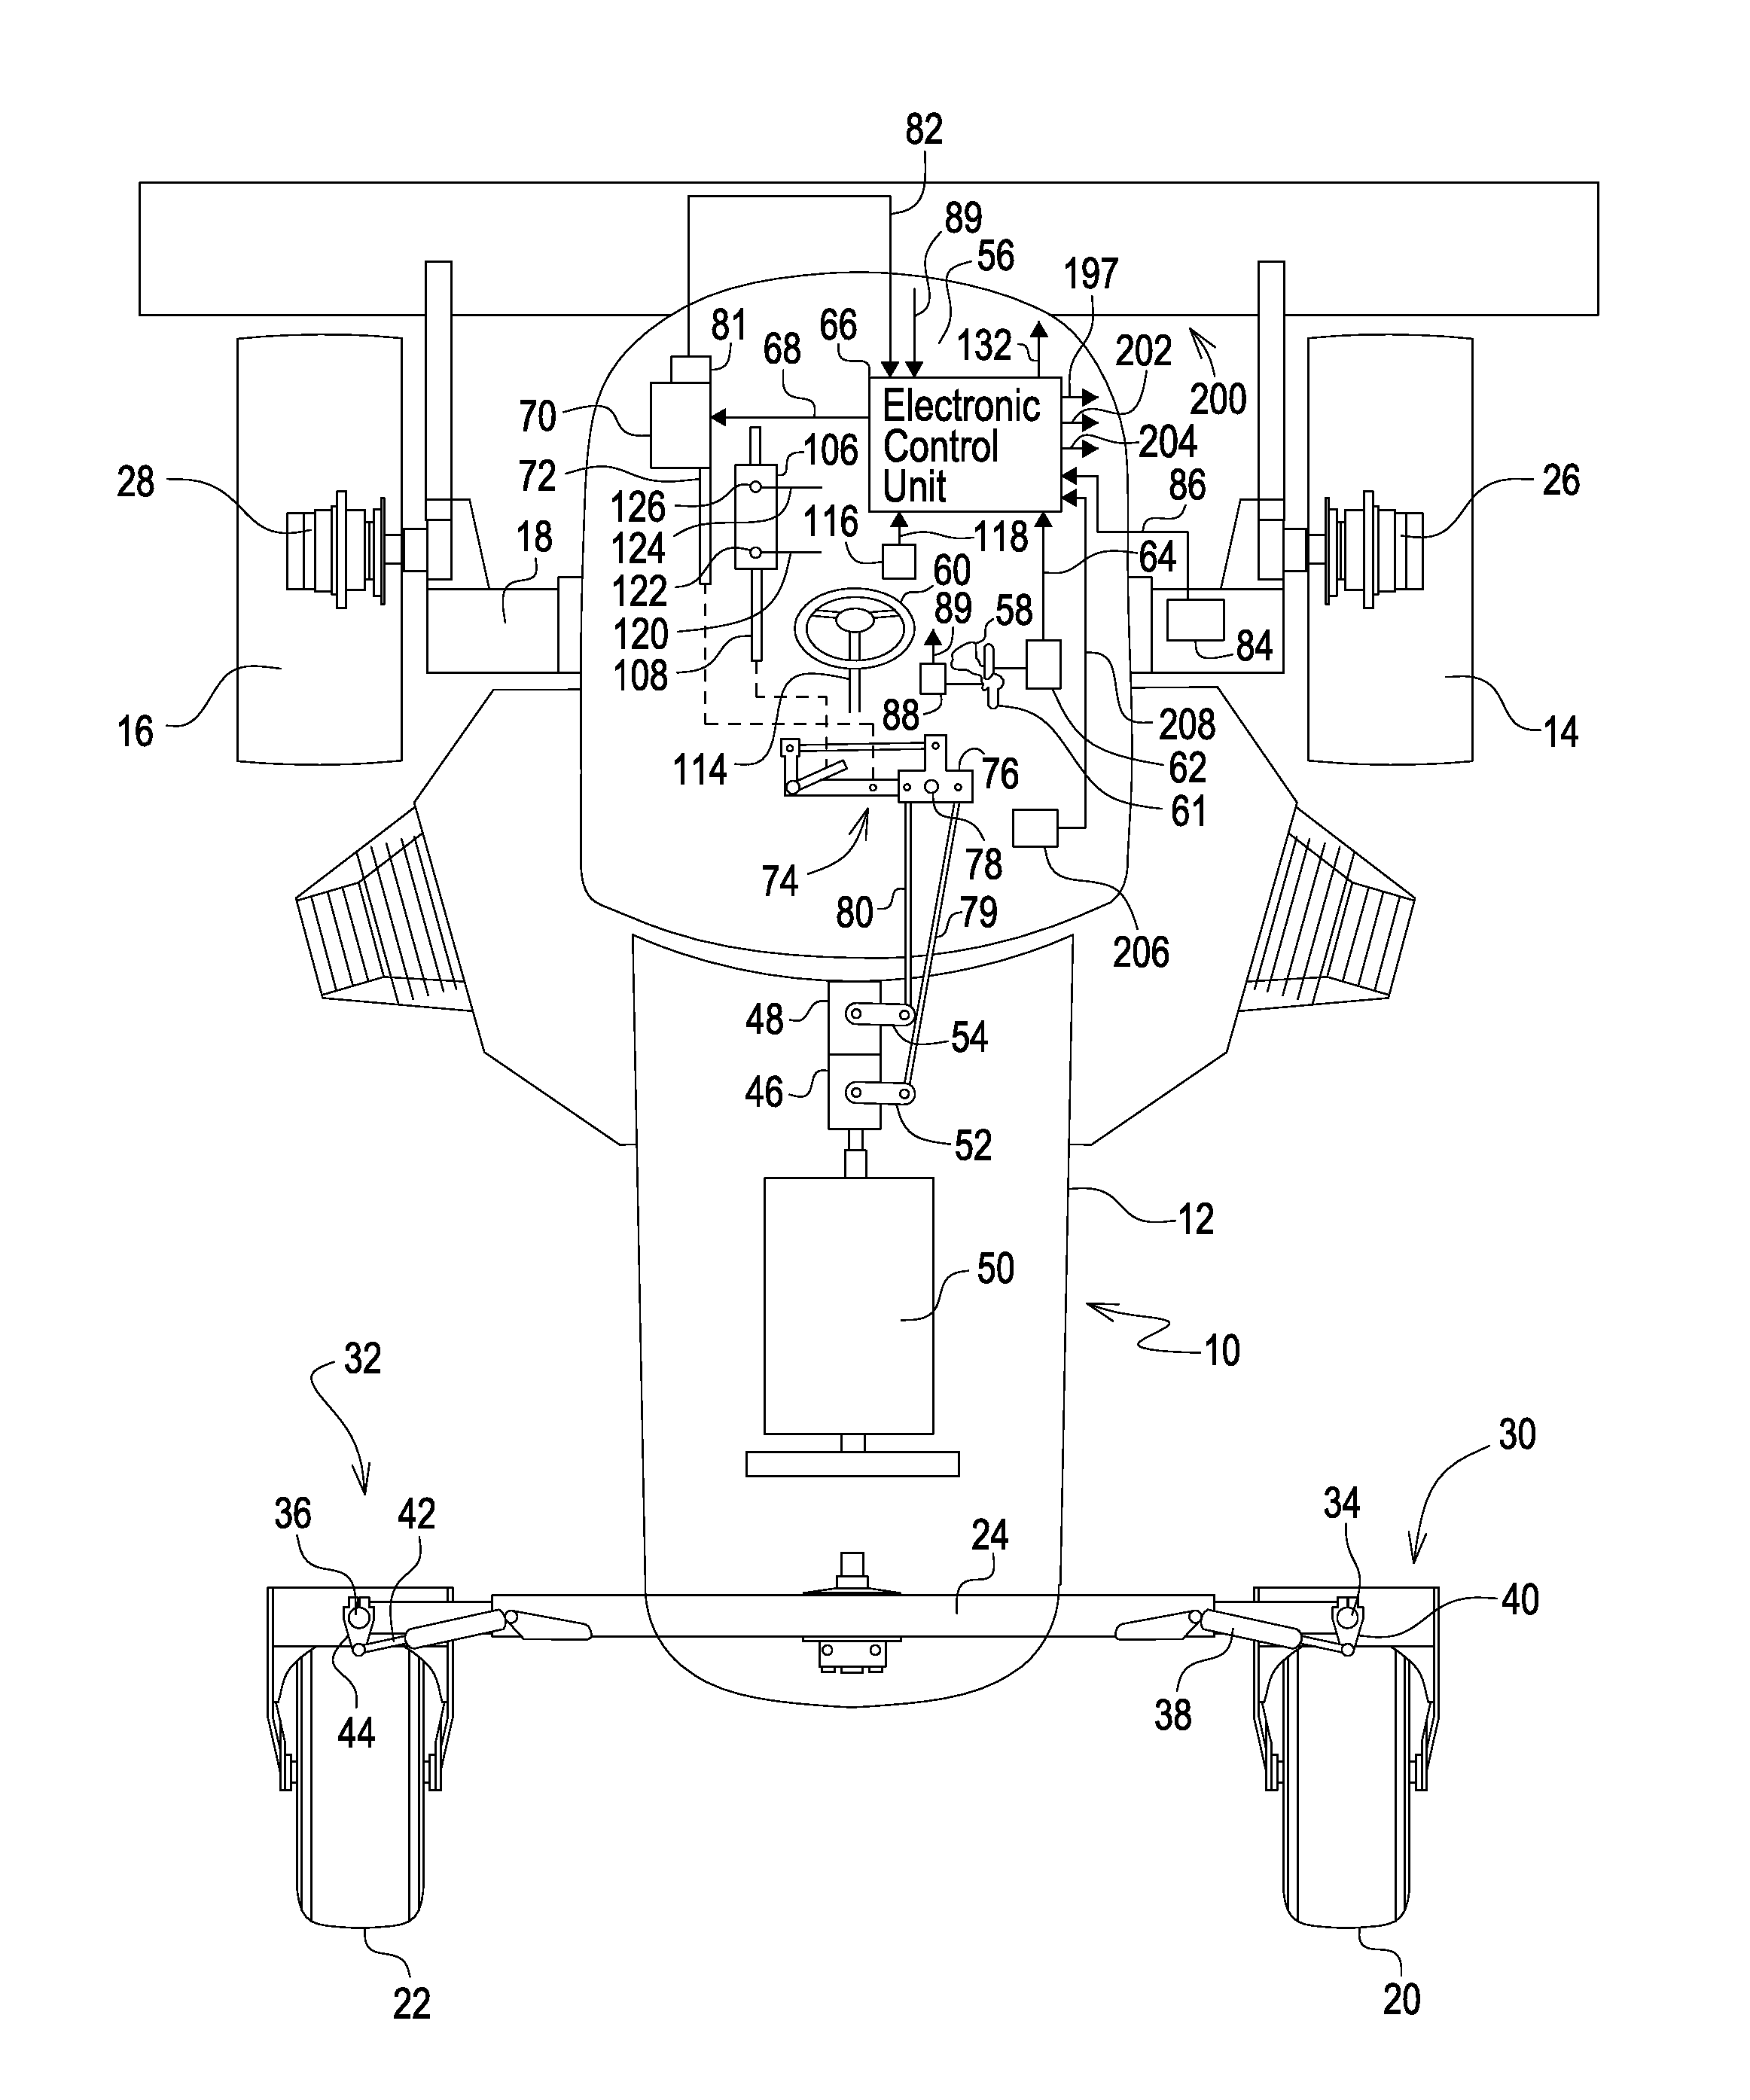 Steering control system for hydrostatically driven front vehicle ground wheels and steerable rear caster wheels